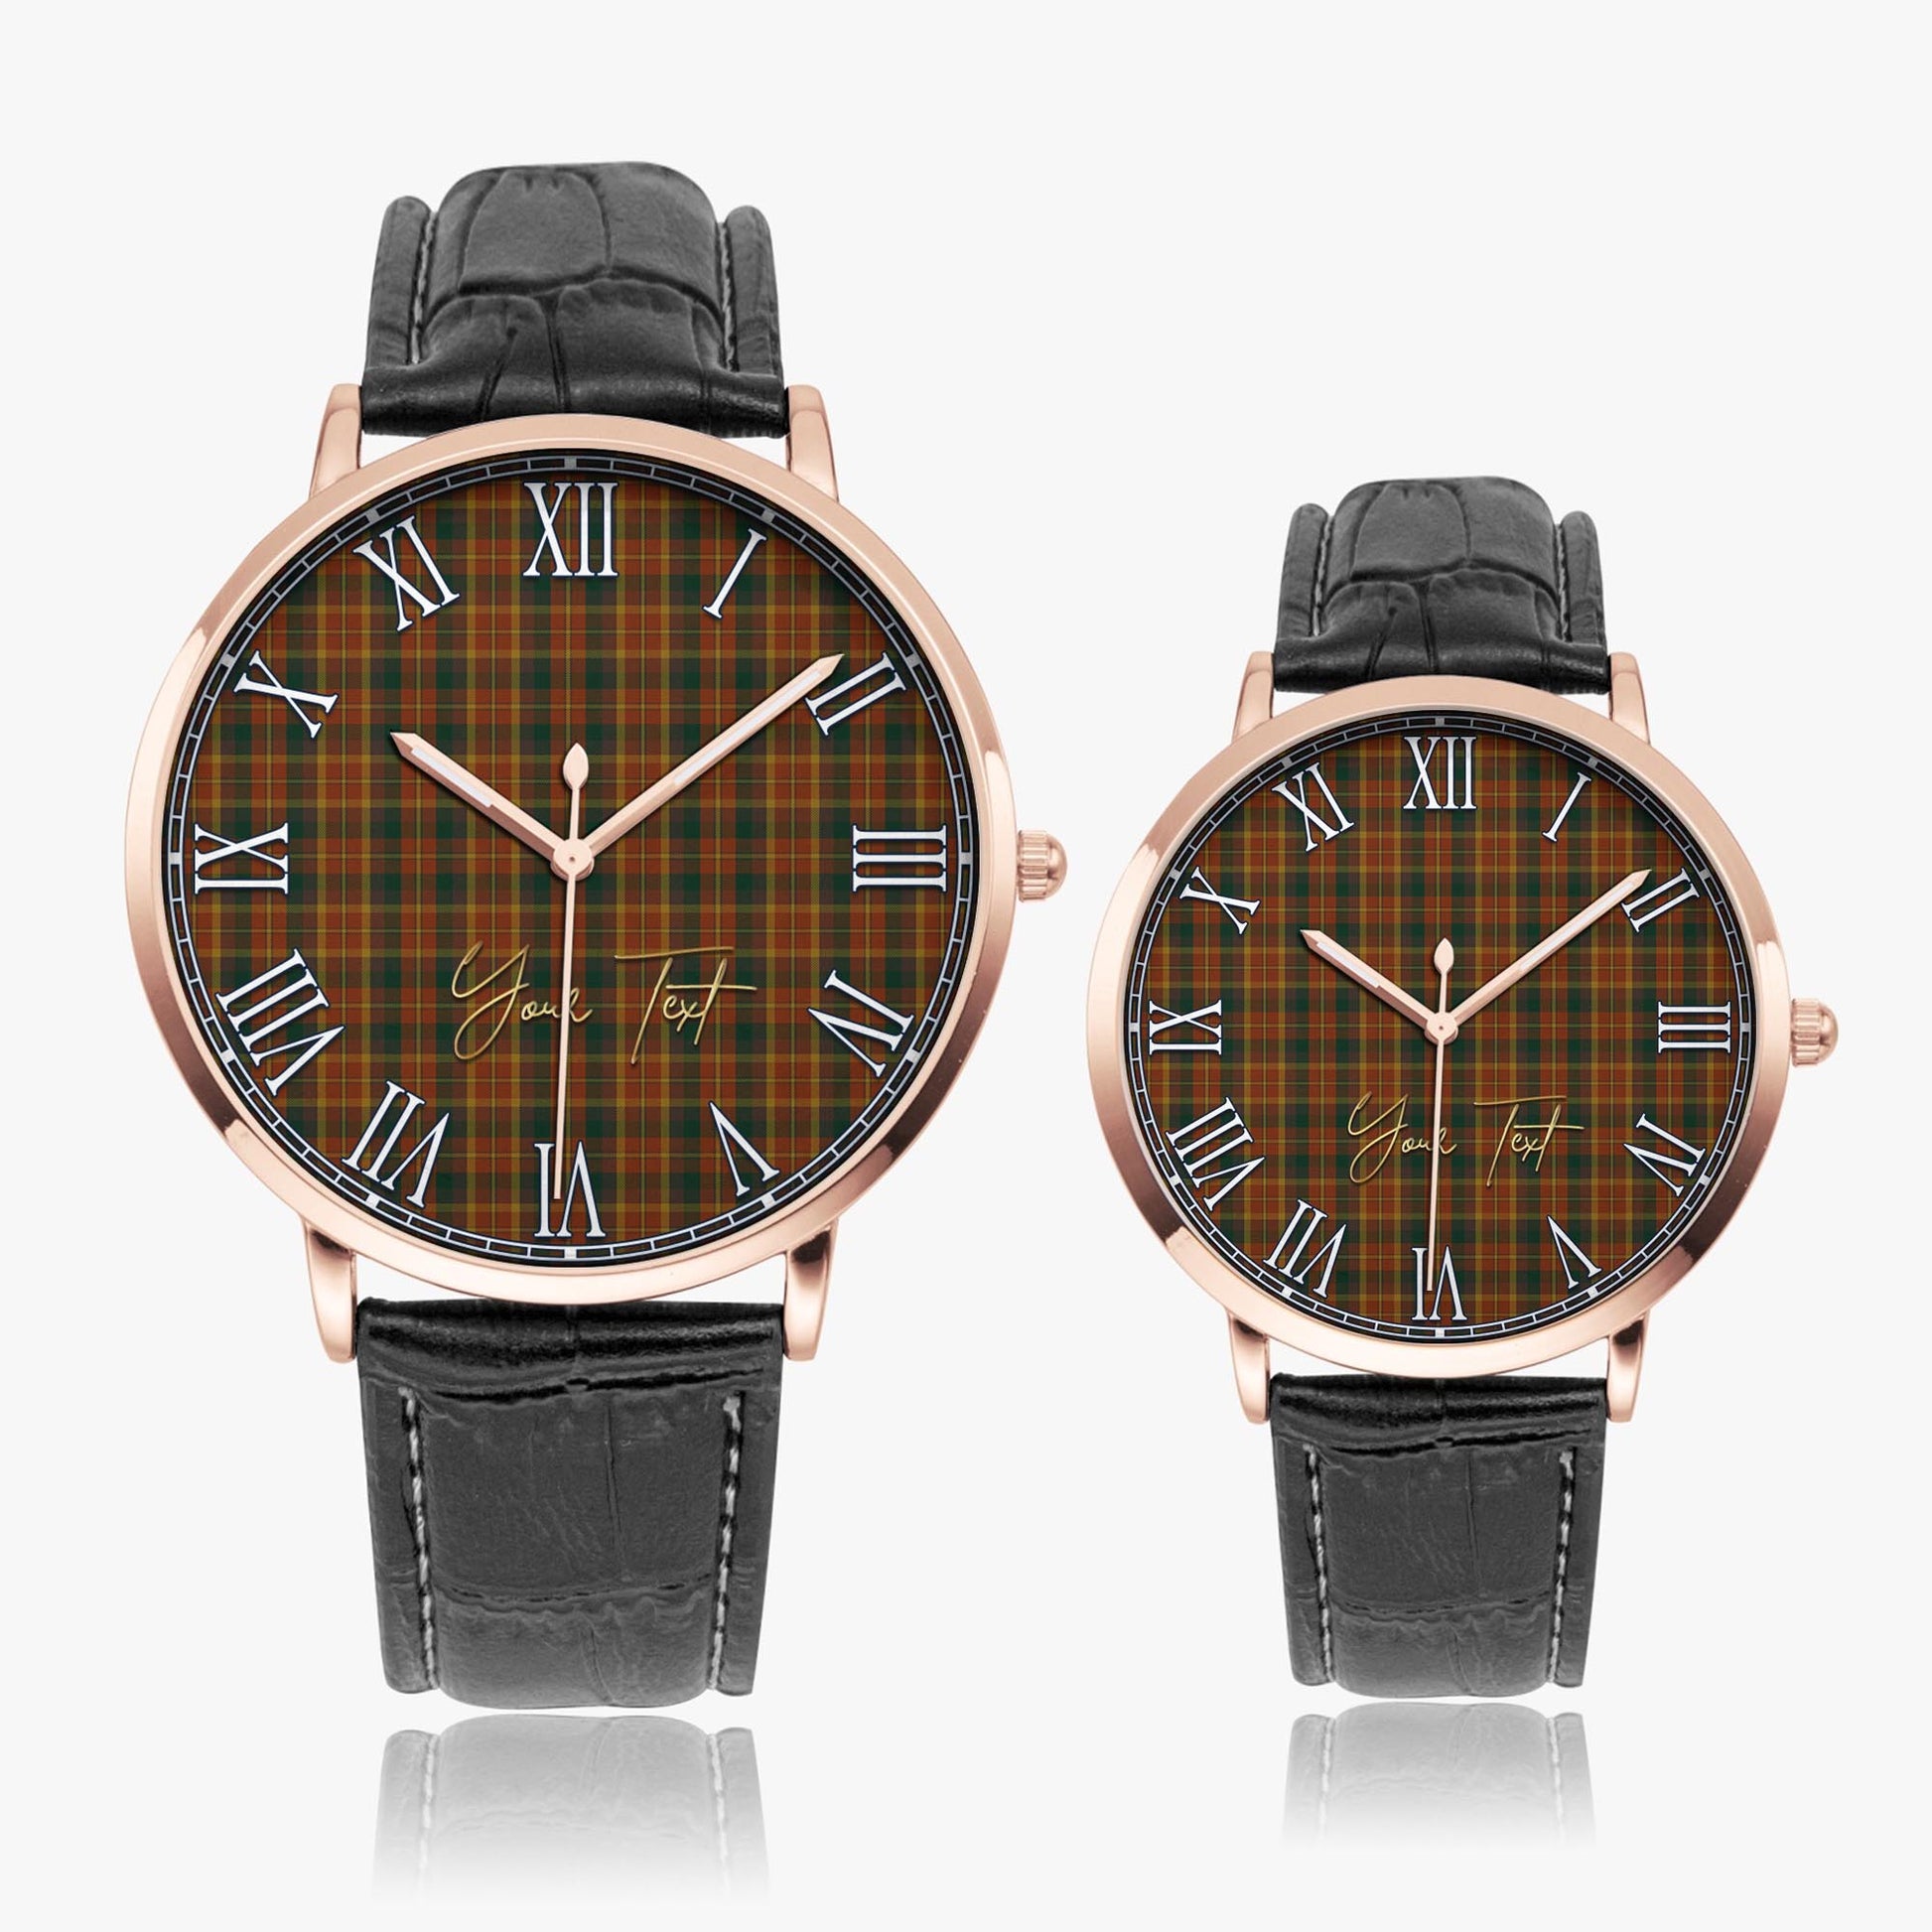 Monaghan County Ireland Tartan Personalized Your Text Leather Trap Quartz Watch Ultra Thin Rose Gold Case With Black Leather Strap - Tartanvibesclothing